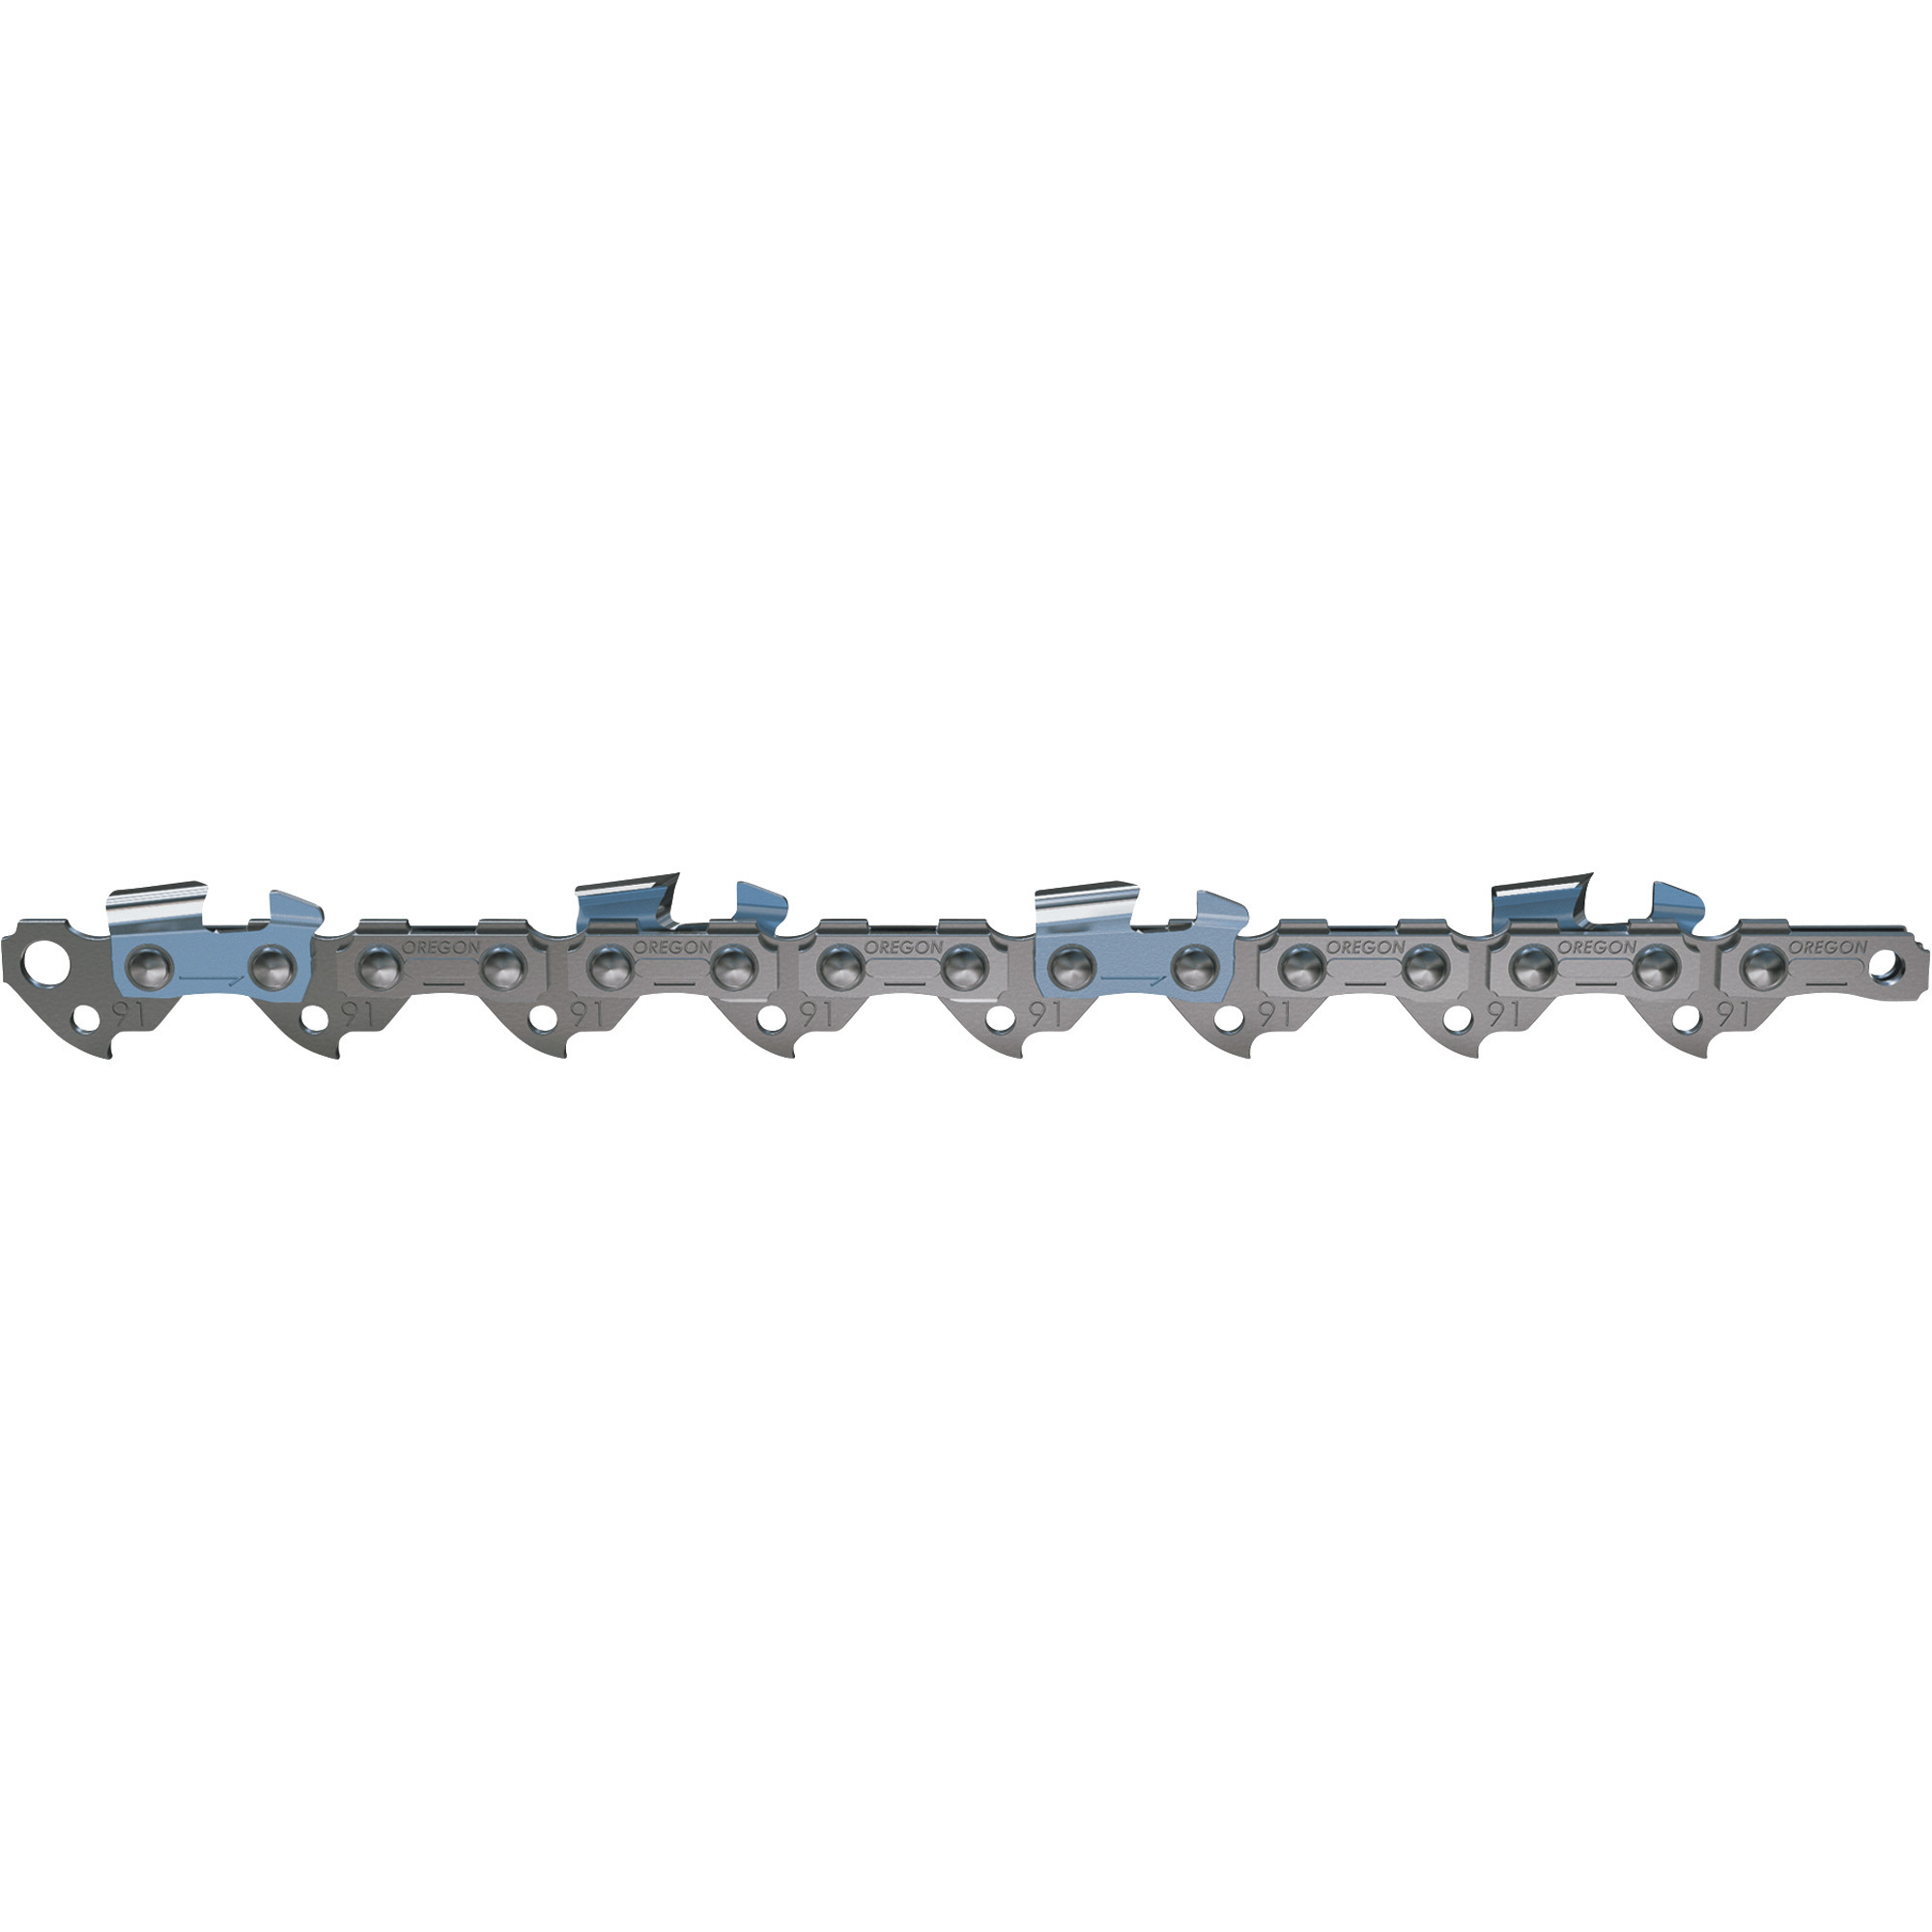 Oregon X-Grind Chainsaw Chain, 3/8Inch Low Profile x 0.050Inch, Fits 18Inch Bar, Model T62/91VXL062G